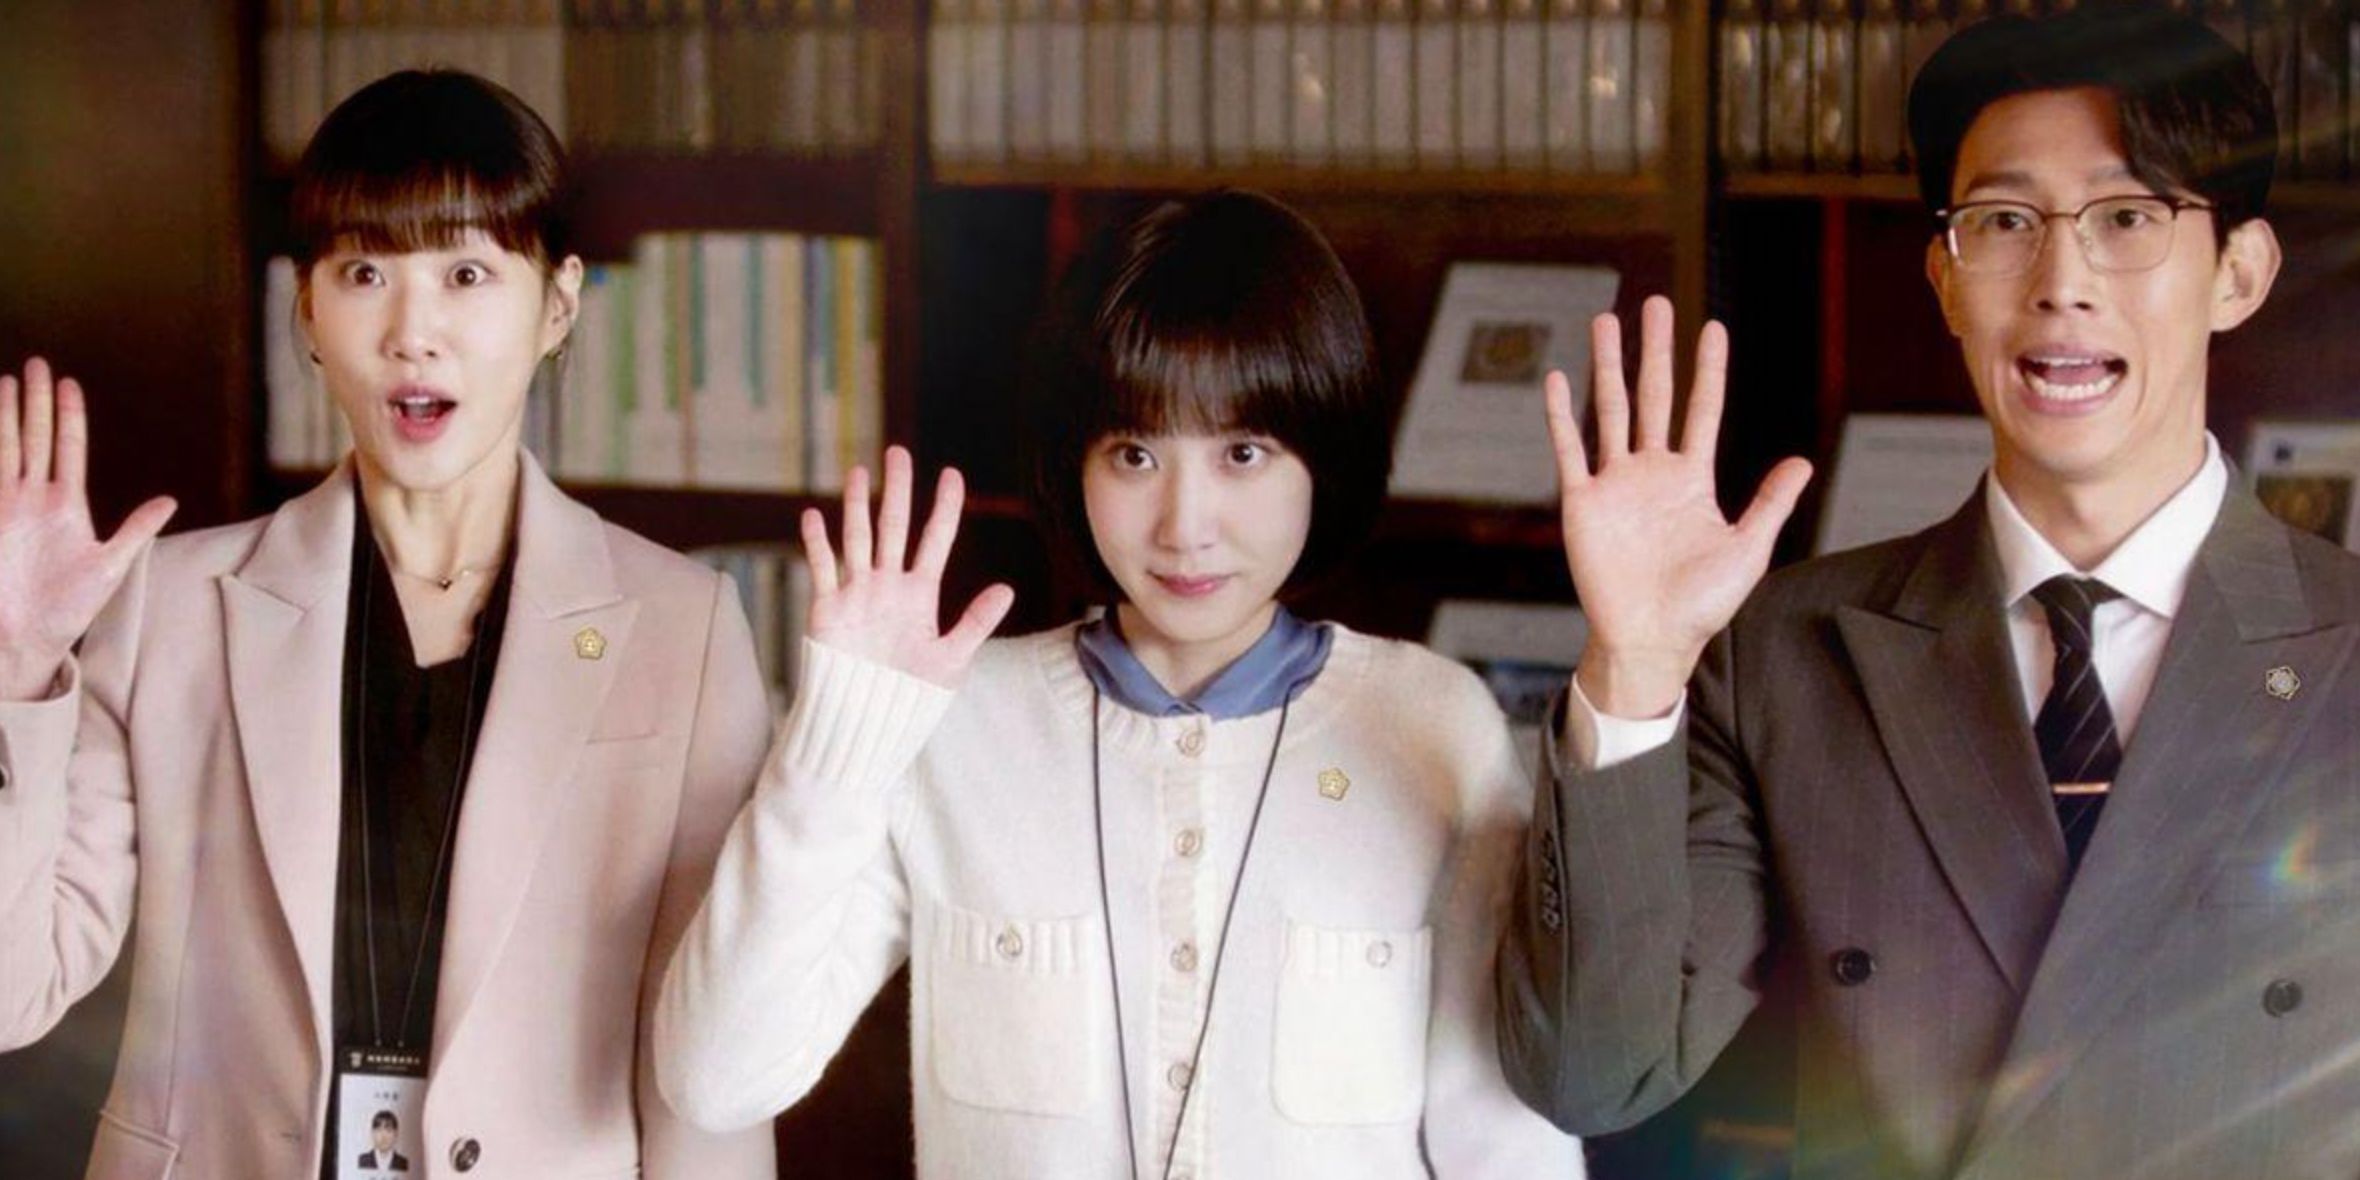 Three lawyers raise their hands in Extraordinary Attorney Woo